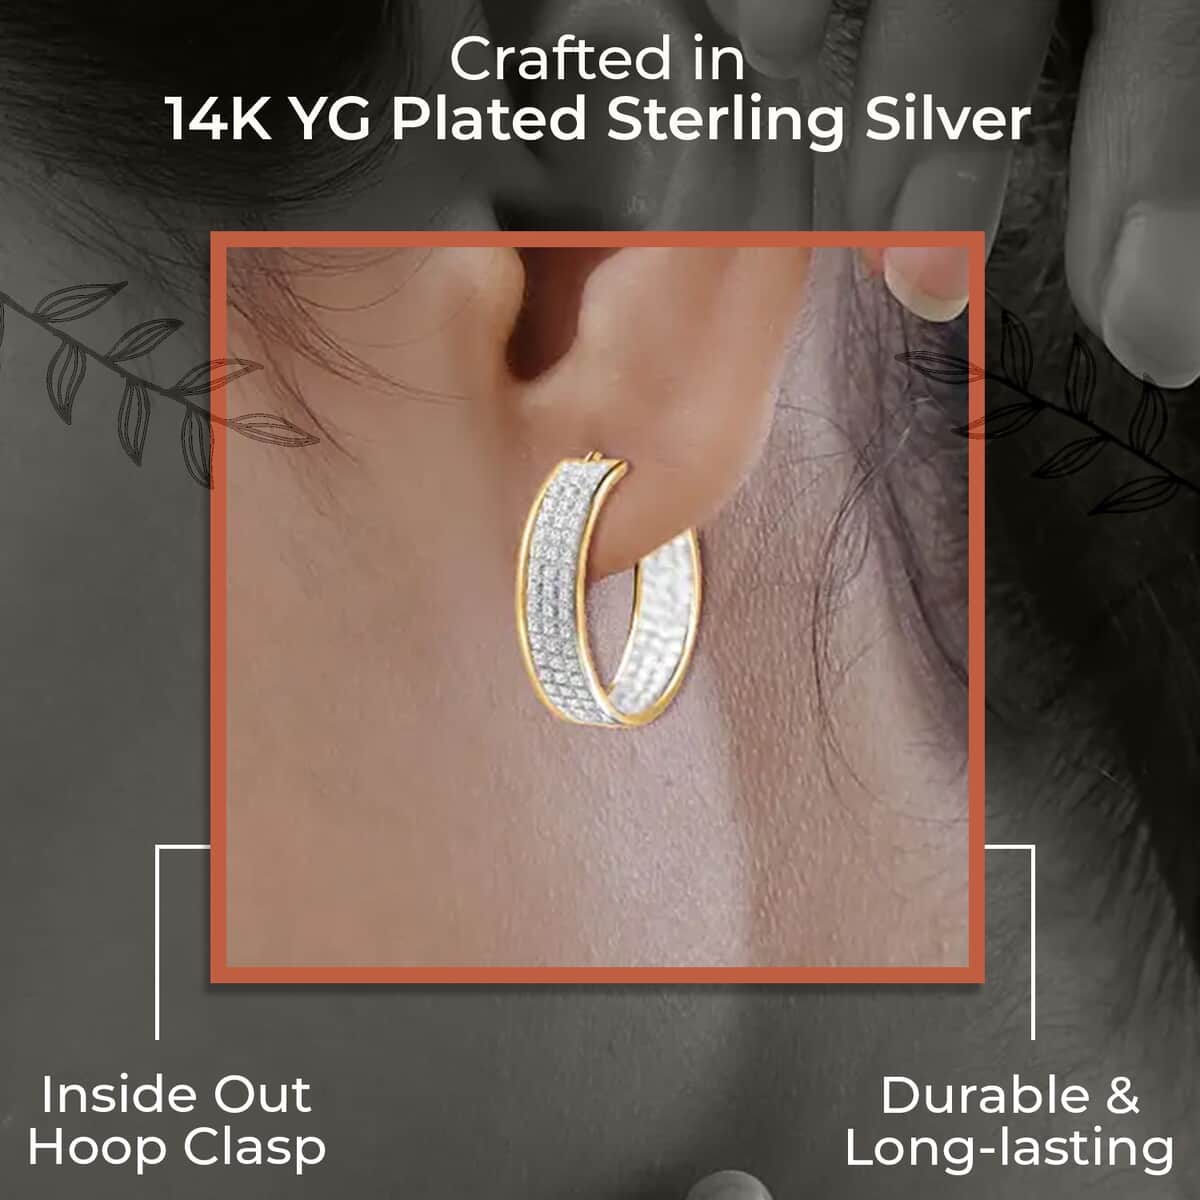 Sandblast Inside Out Hoop Earrings For Women, 14K Yellow Gold Plated Sterling Silver Hoop Earrings, Gifts For Her image number 2